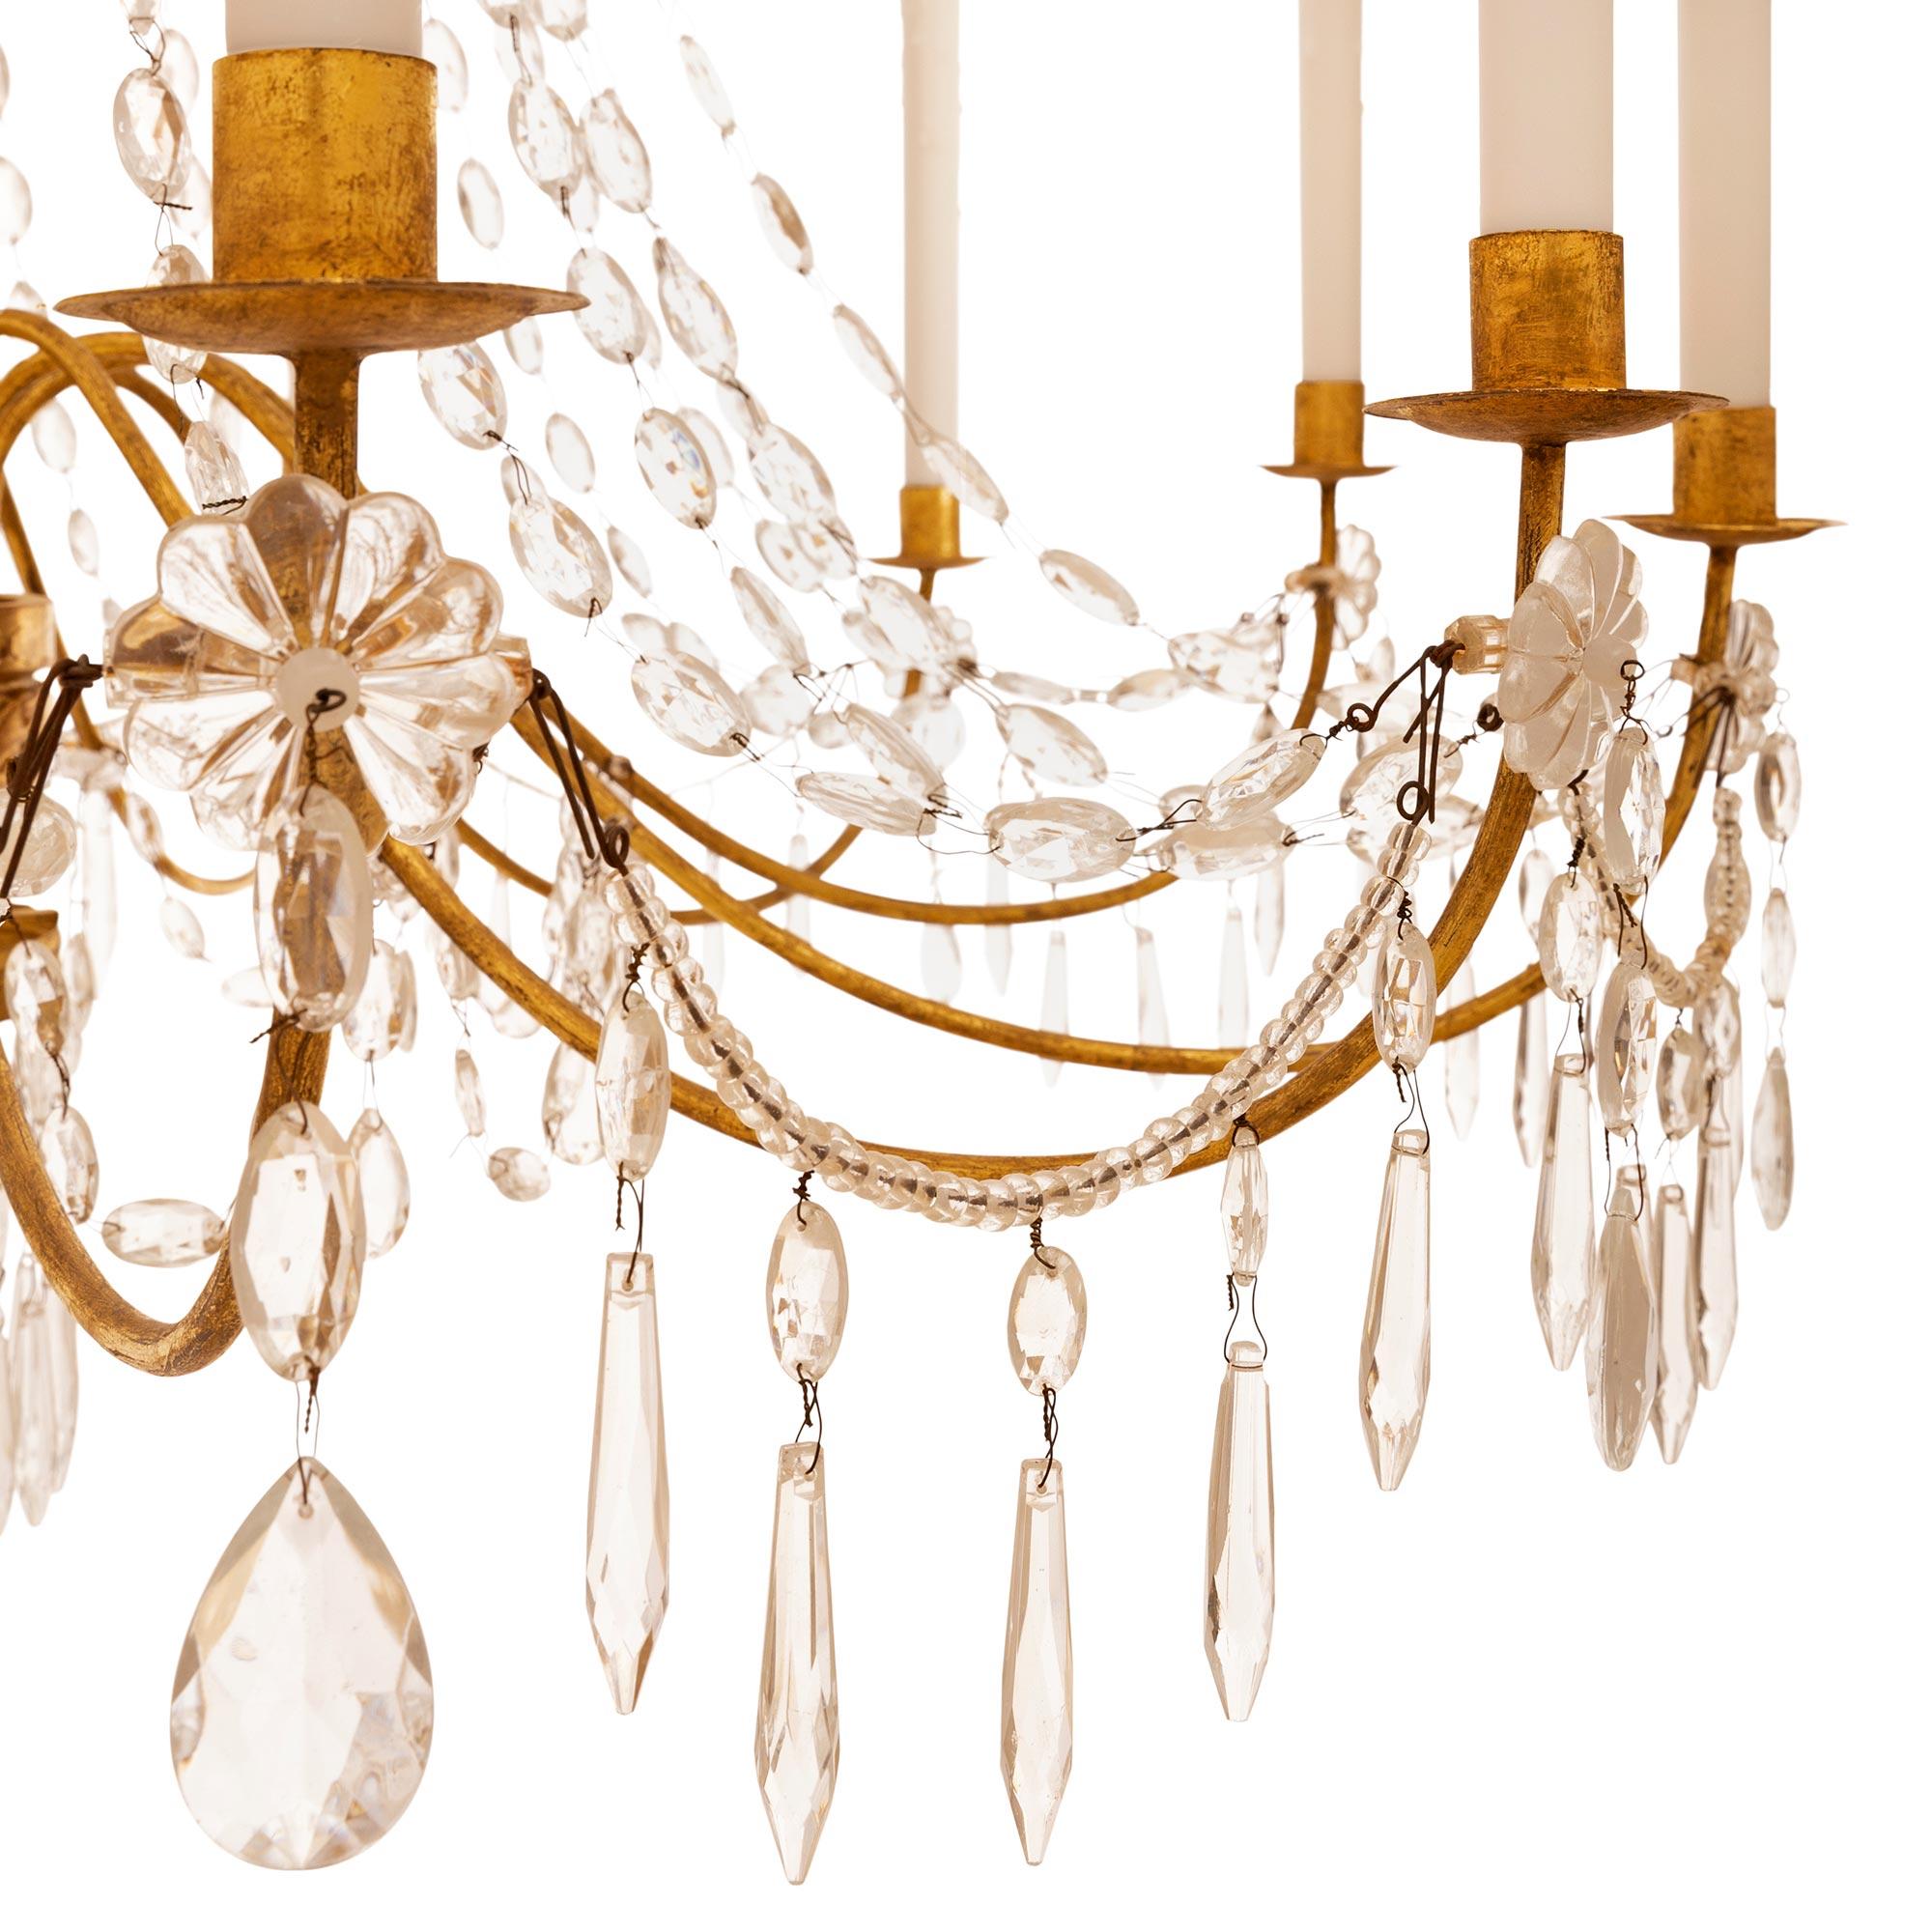 Italian 19th Century Giltwood and Gold Leaf on Metal Chandelier For Sale 1